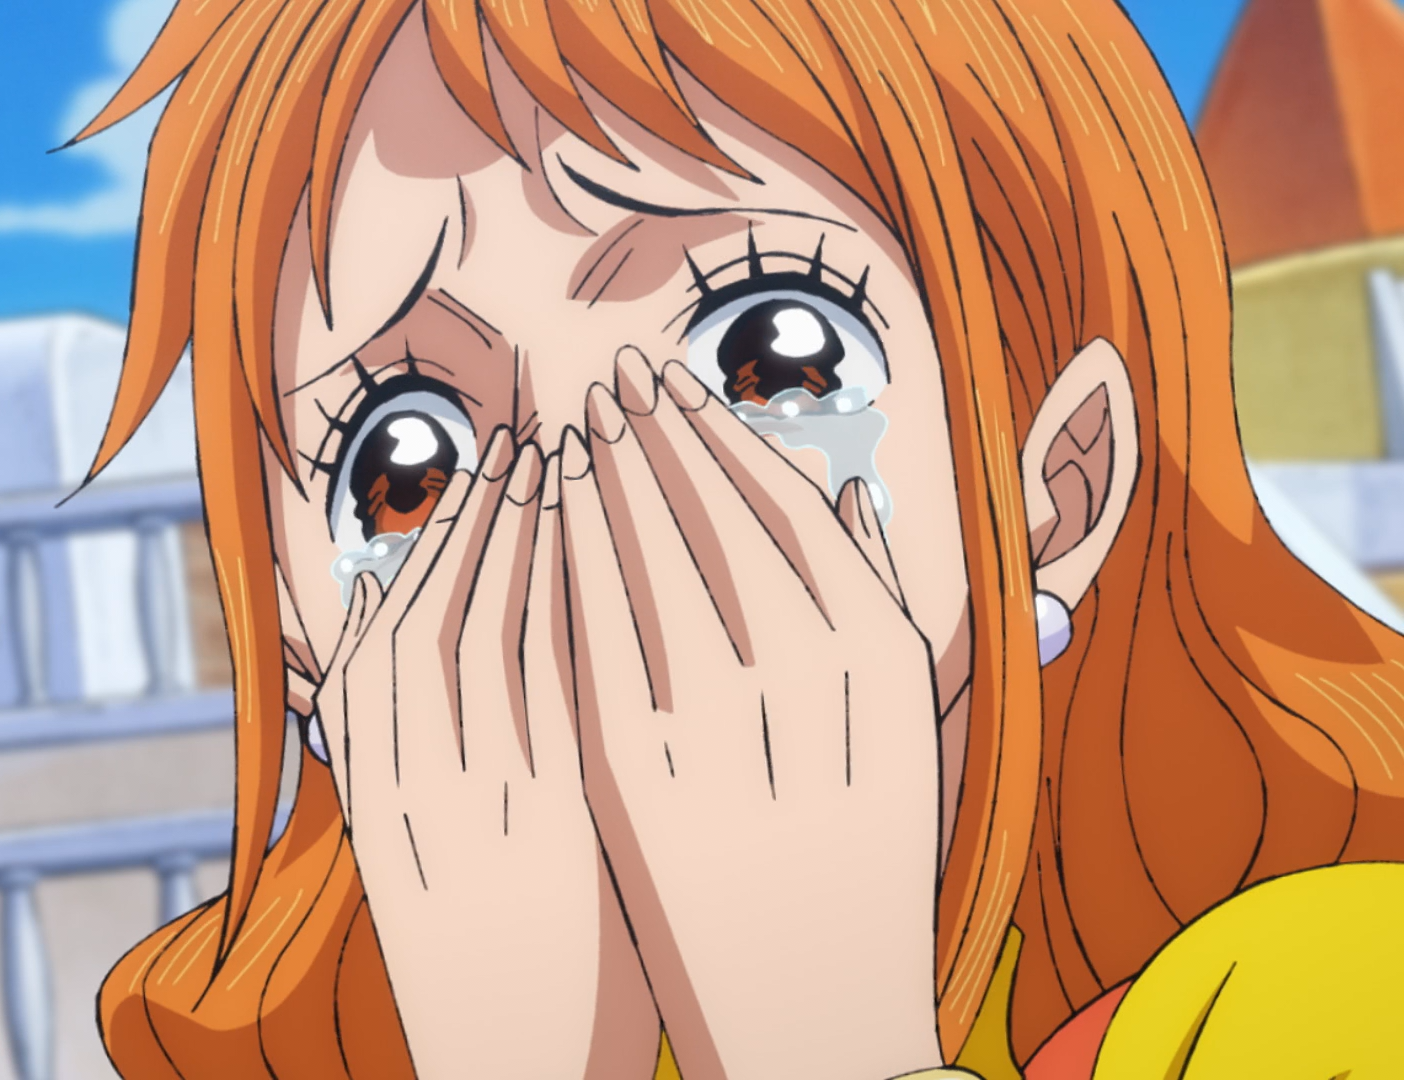 Nami/Personality and Relationships, One Piece Wiki